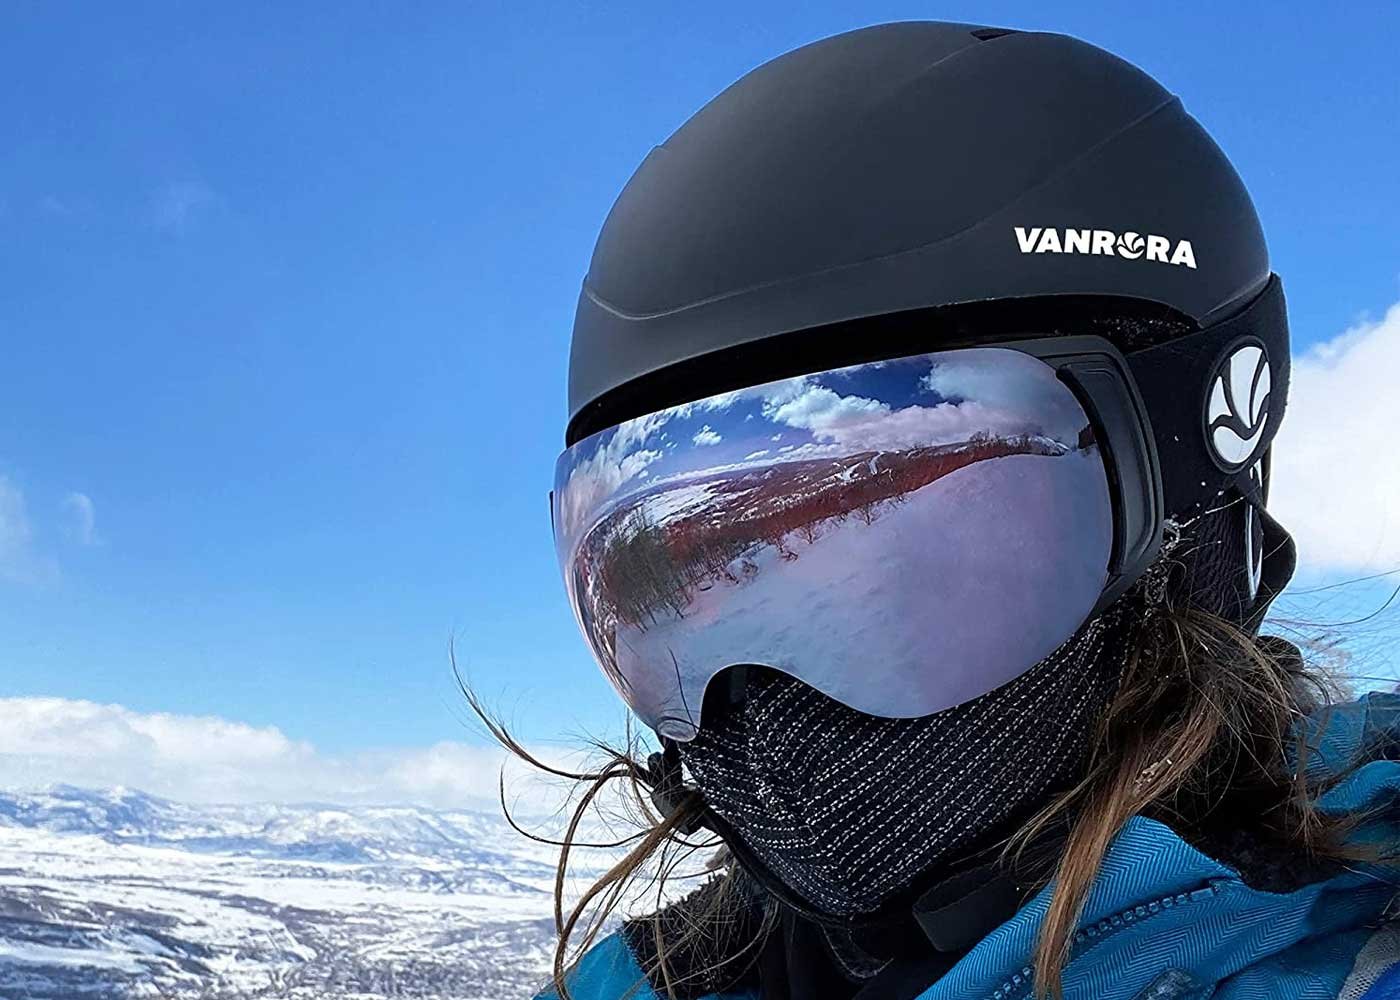 The 9 Best Snowboard Helmets Review and Buying Guide